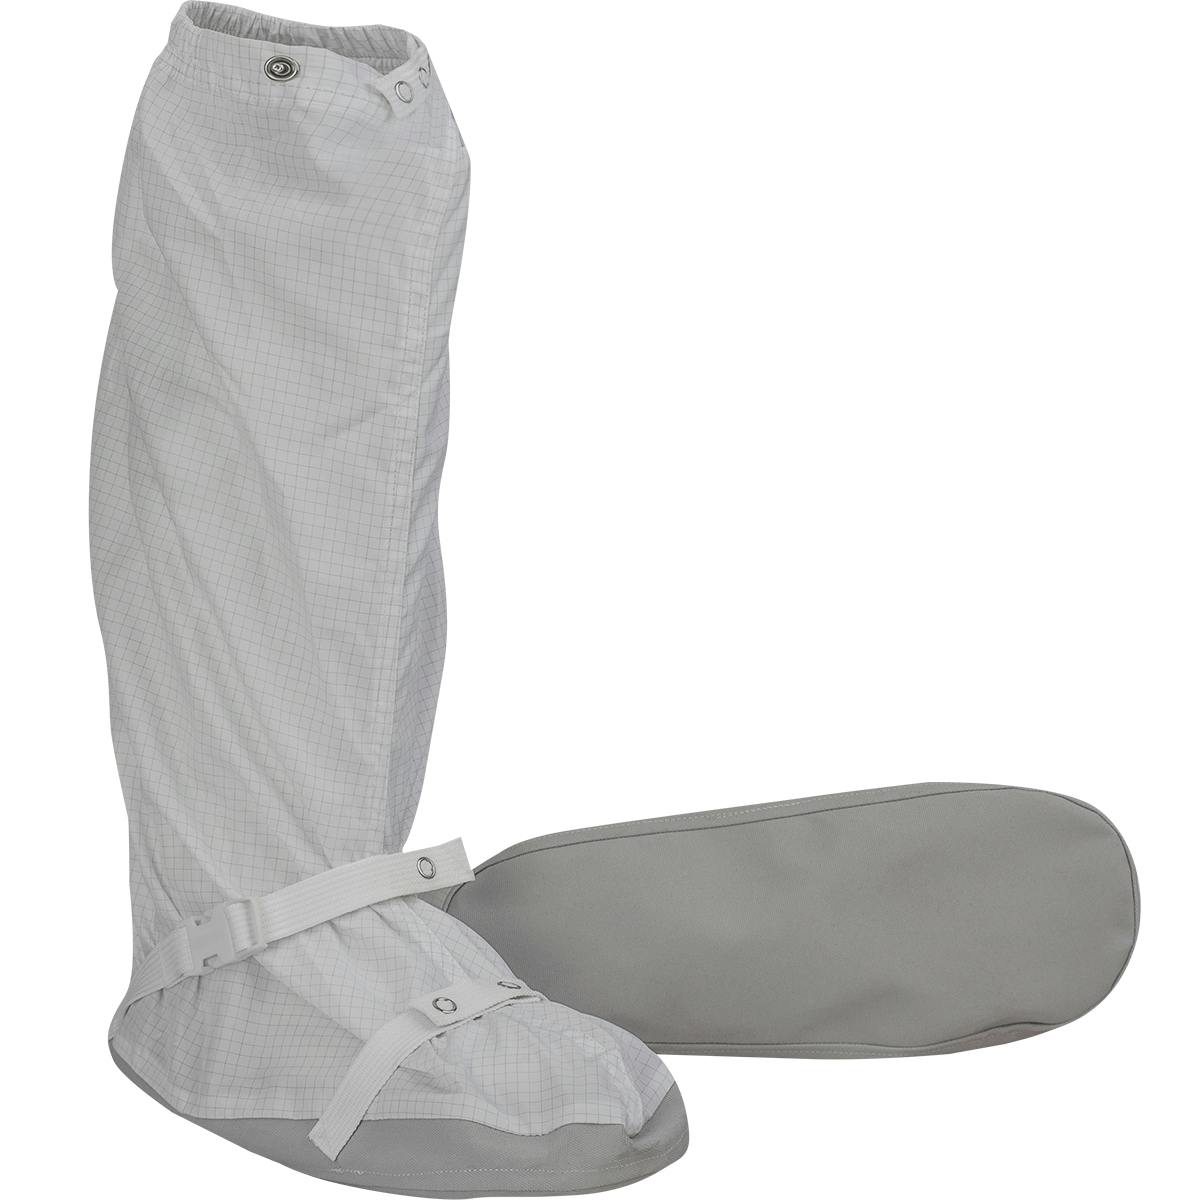 Altessa Grid ISO 5 (Class 100) Cleanroom Boot, White (CB3-74WH)